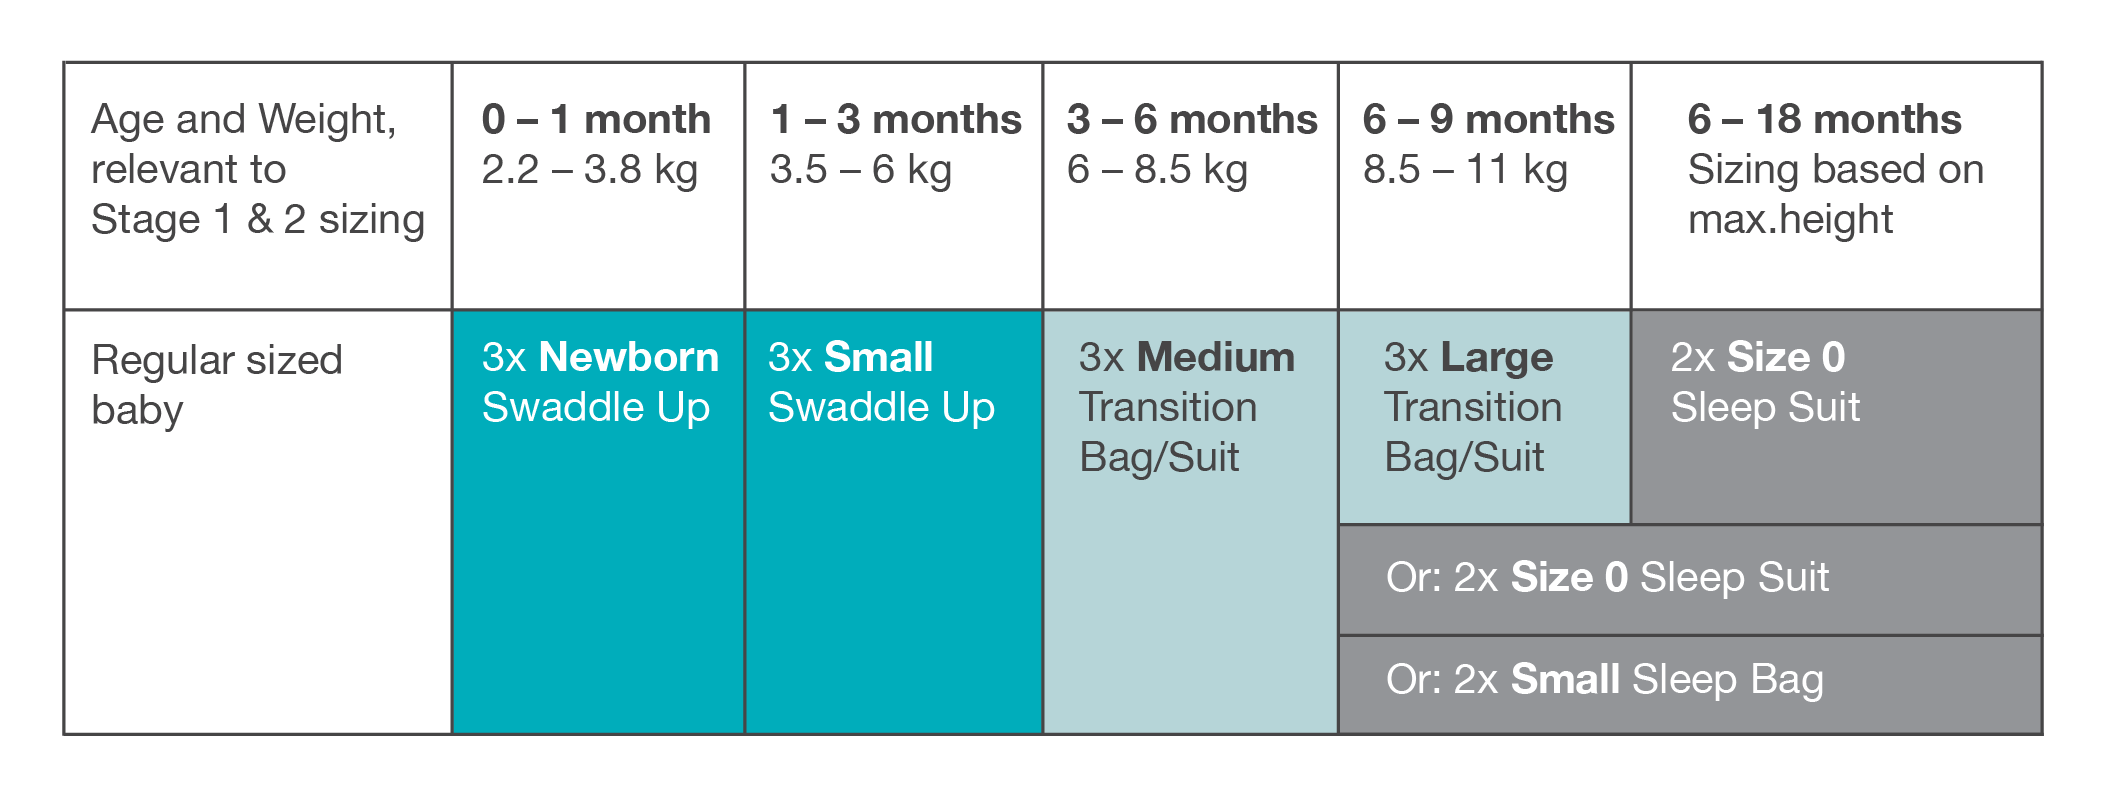 Our Love to Dream Quantity & Size Guide helps you know how many swaddles you may need to buy at stage 1 and 2 of our sleep system and beyond.